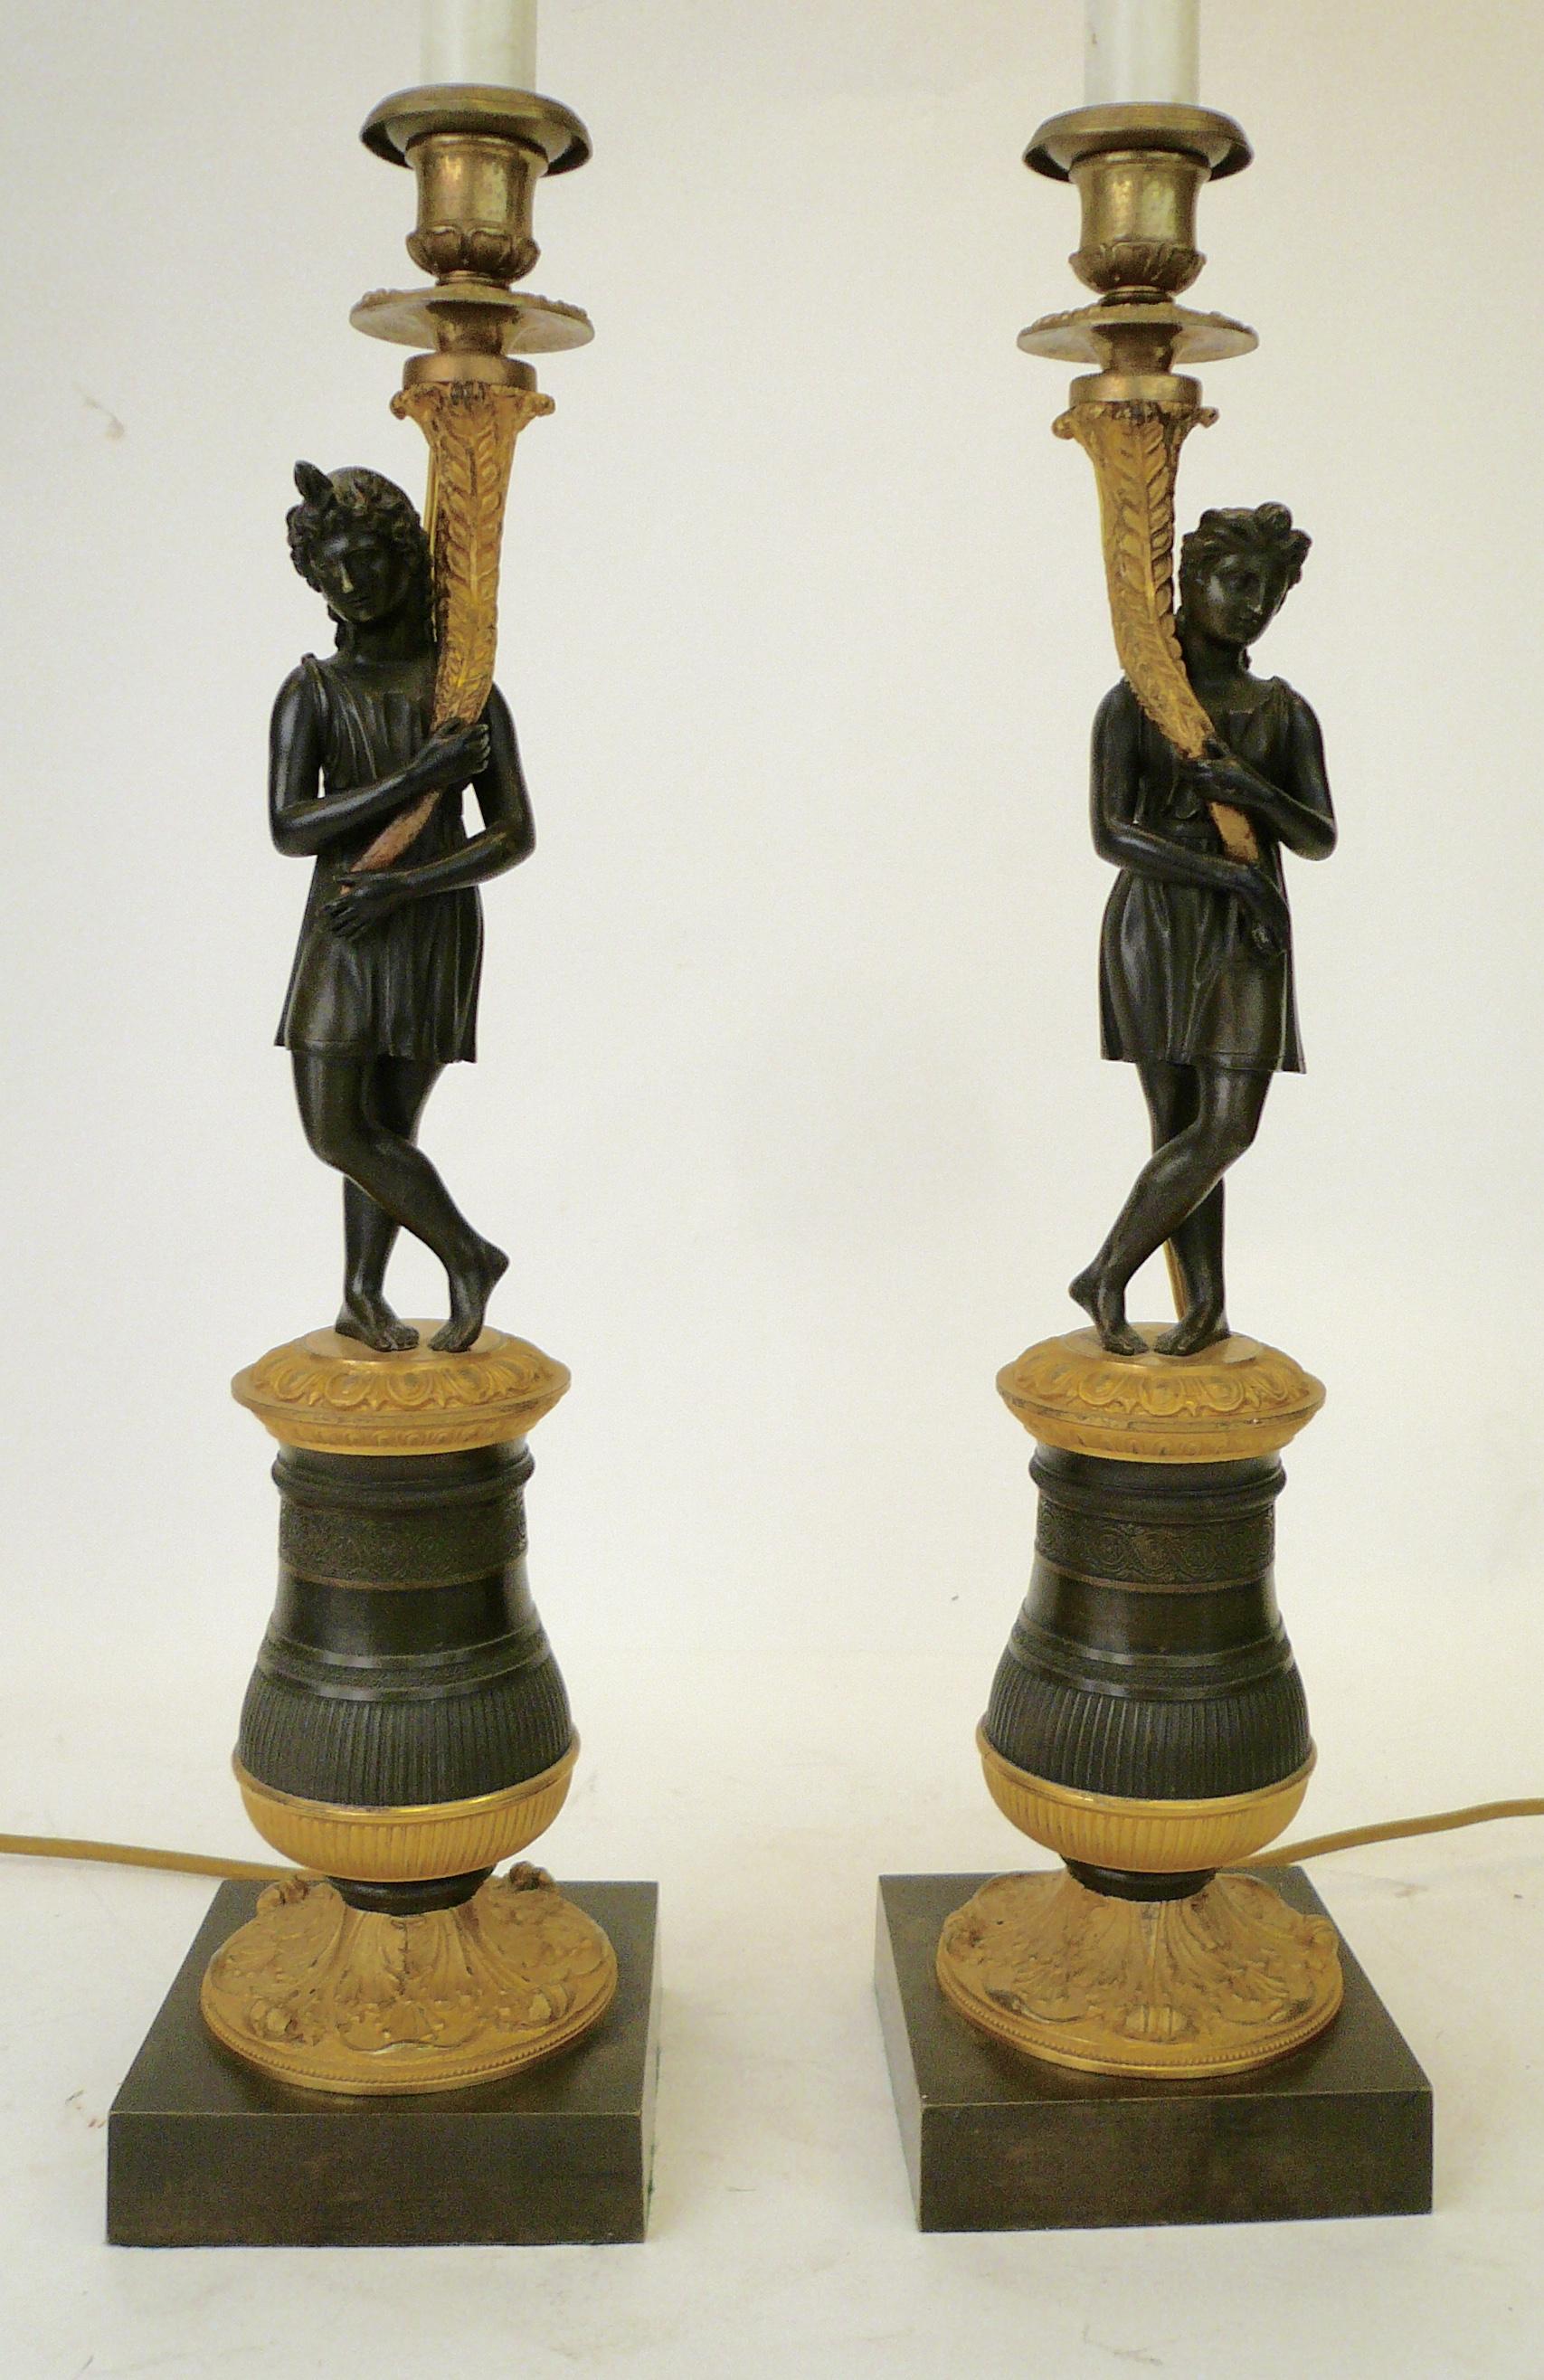 Neoclassical Pair of Charles X Gilt and Patinated Bronze Figural Candlestick Lamps